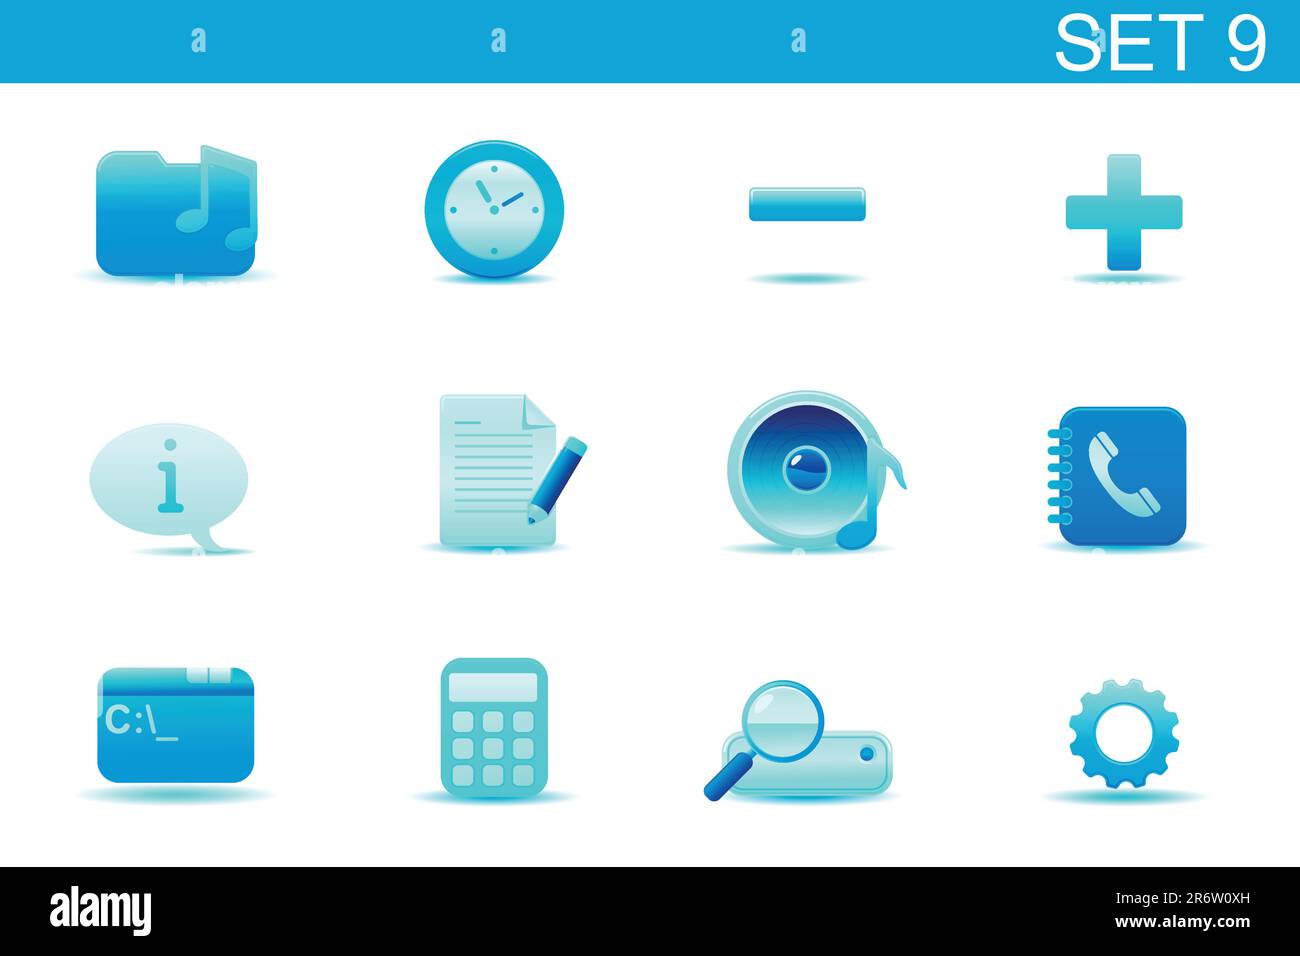 Vector illustration ? set of blue elegant simple icons for common computer and media devices functions. Set-9 Stock Vector